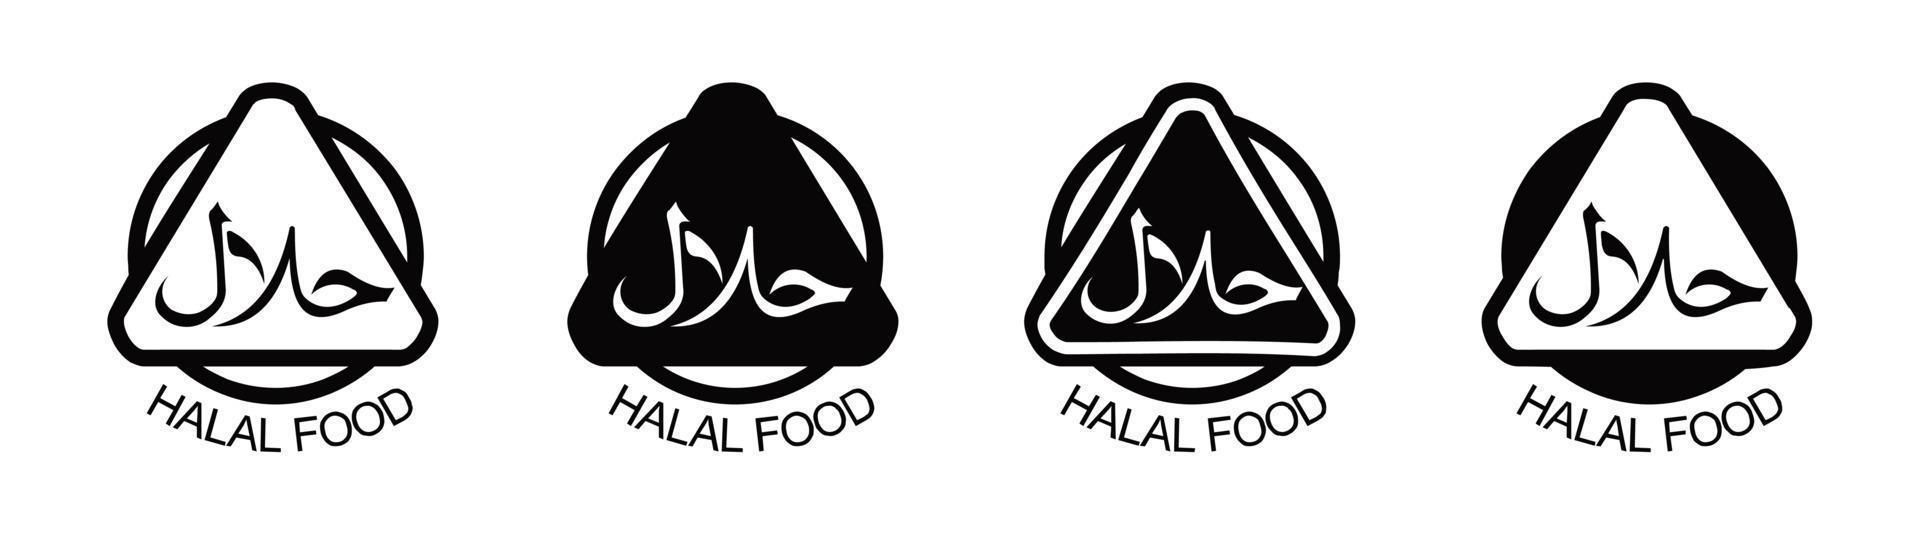 halal icon set  product emblem  vector illustration.Set of halal food products labels ,Vector Halal sign certificate tag.